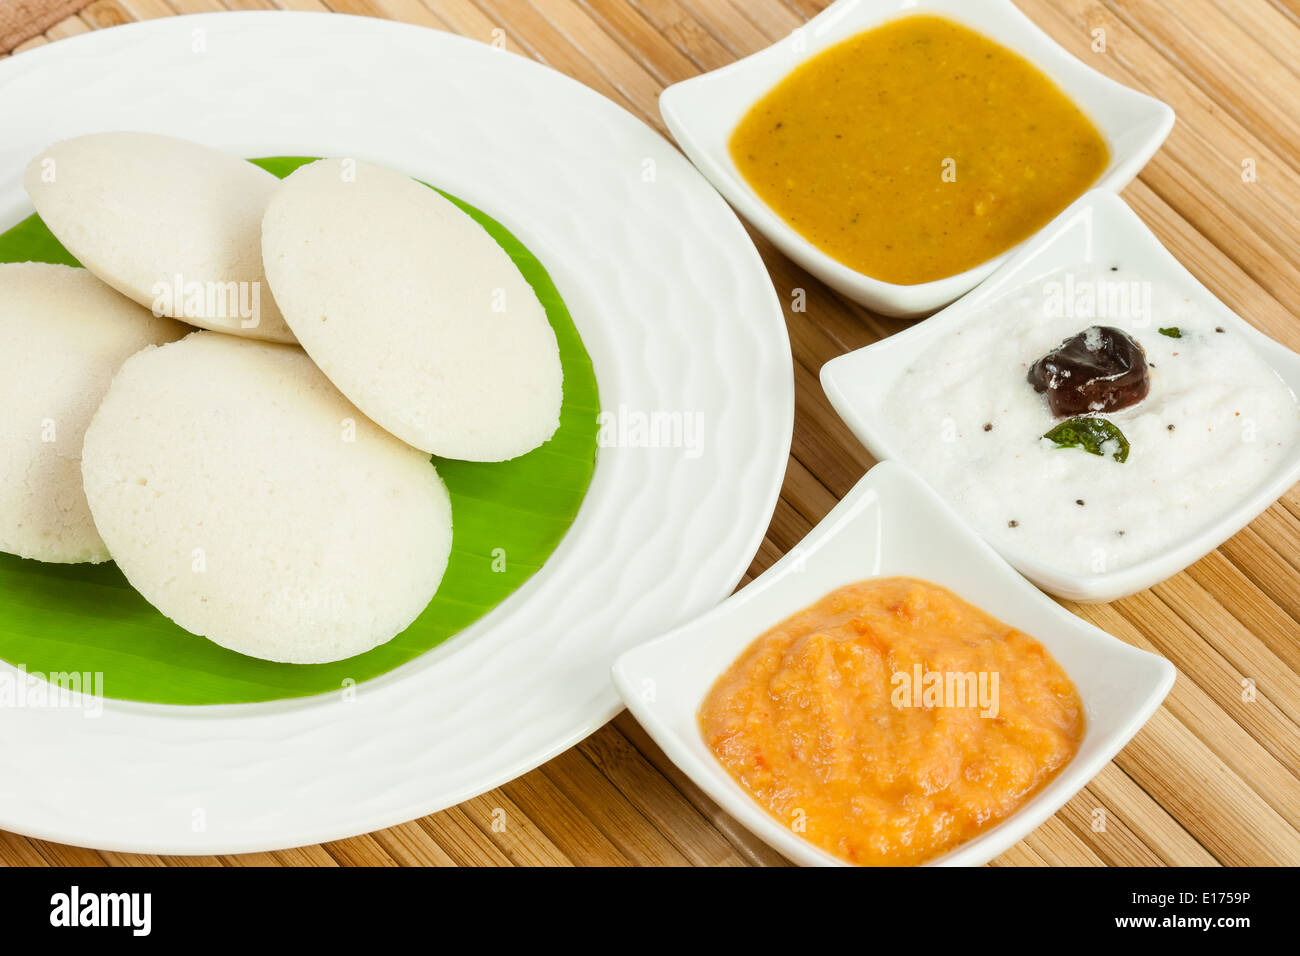 Traditional south Indian breakfast of Idly (Idli) served with tomato chutney, coconut chutney and sambar on a plate. Stock Photo